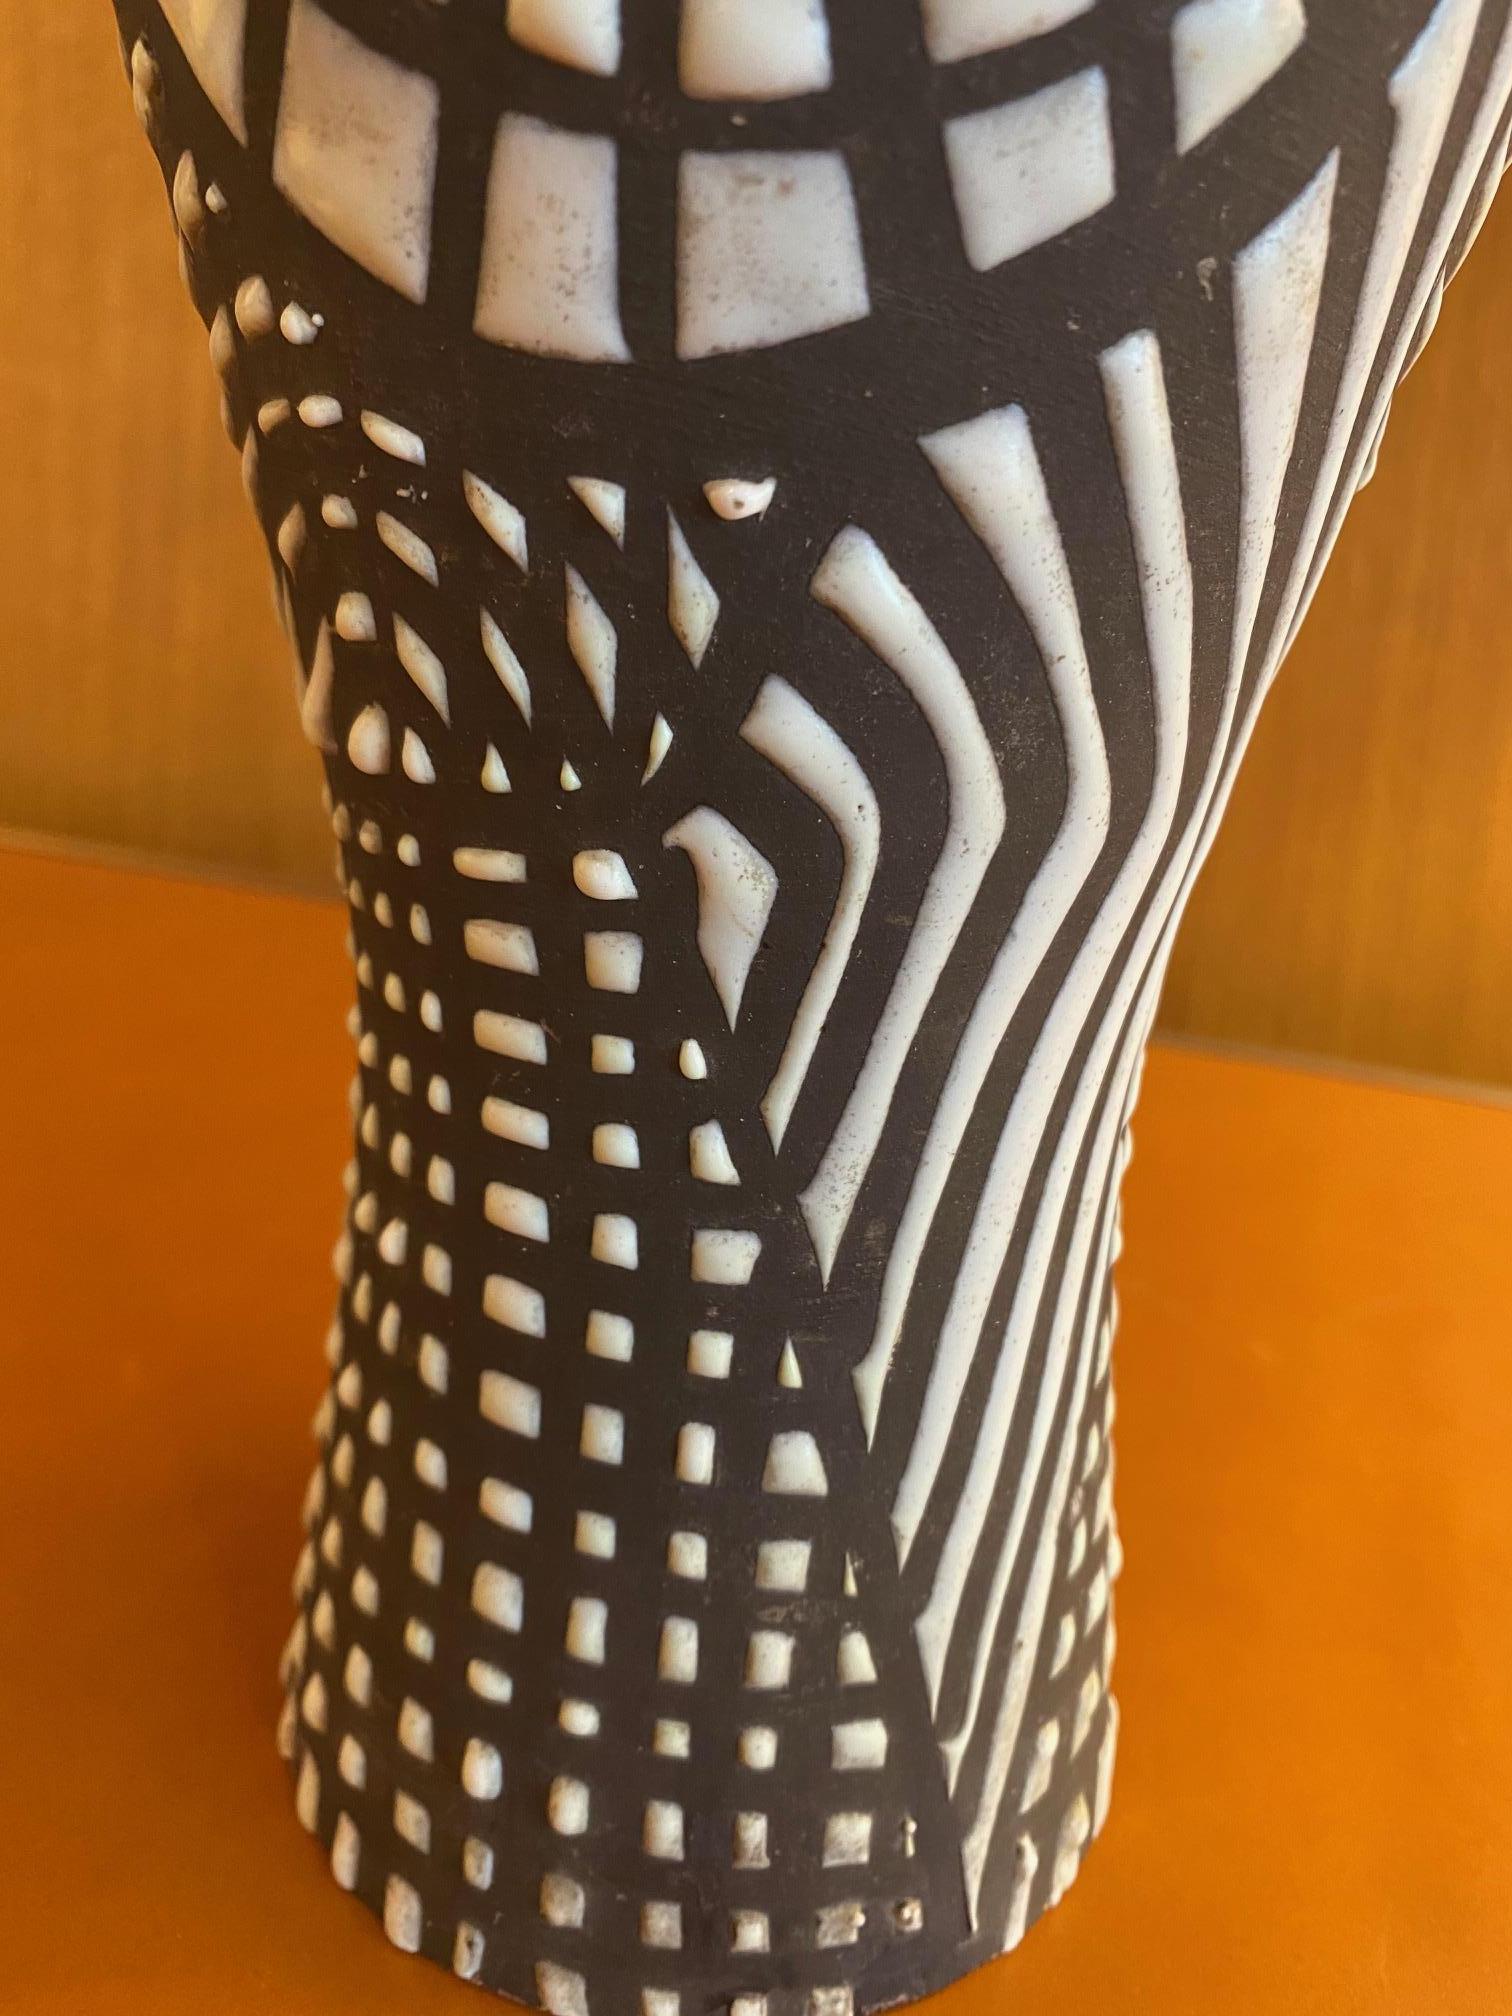 Ceramic vase by Roger Capron, France, 1950s
Signed Capron Vallauris.